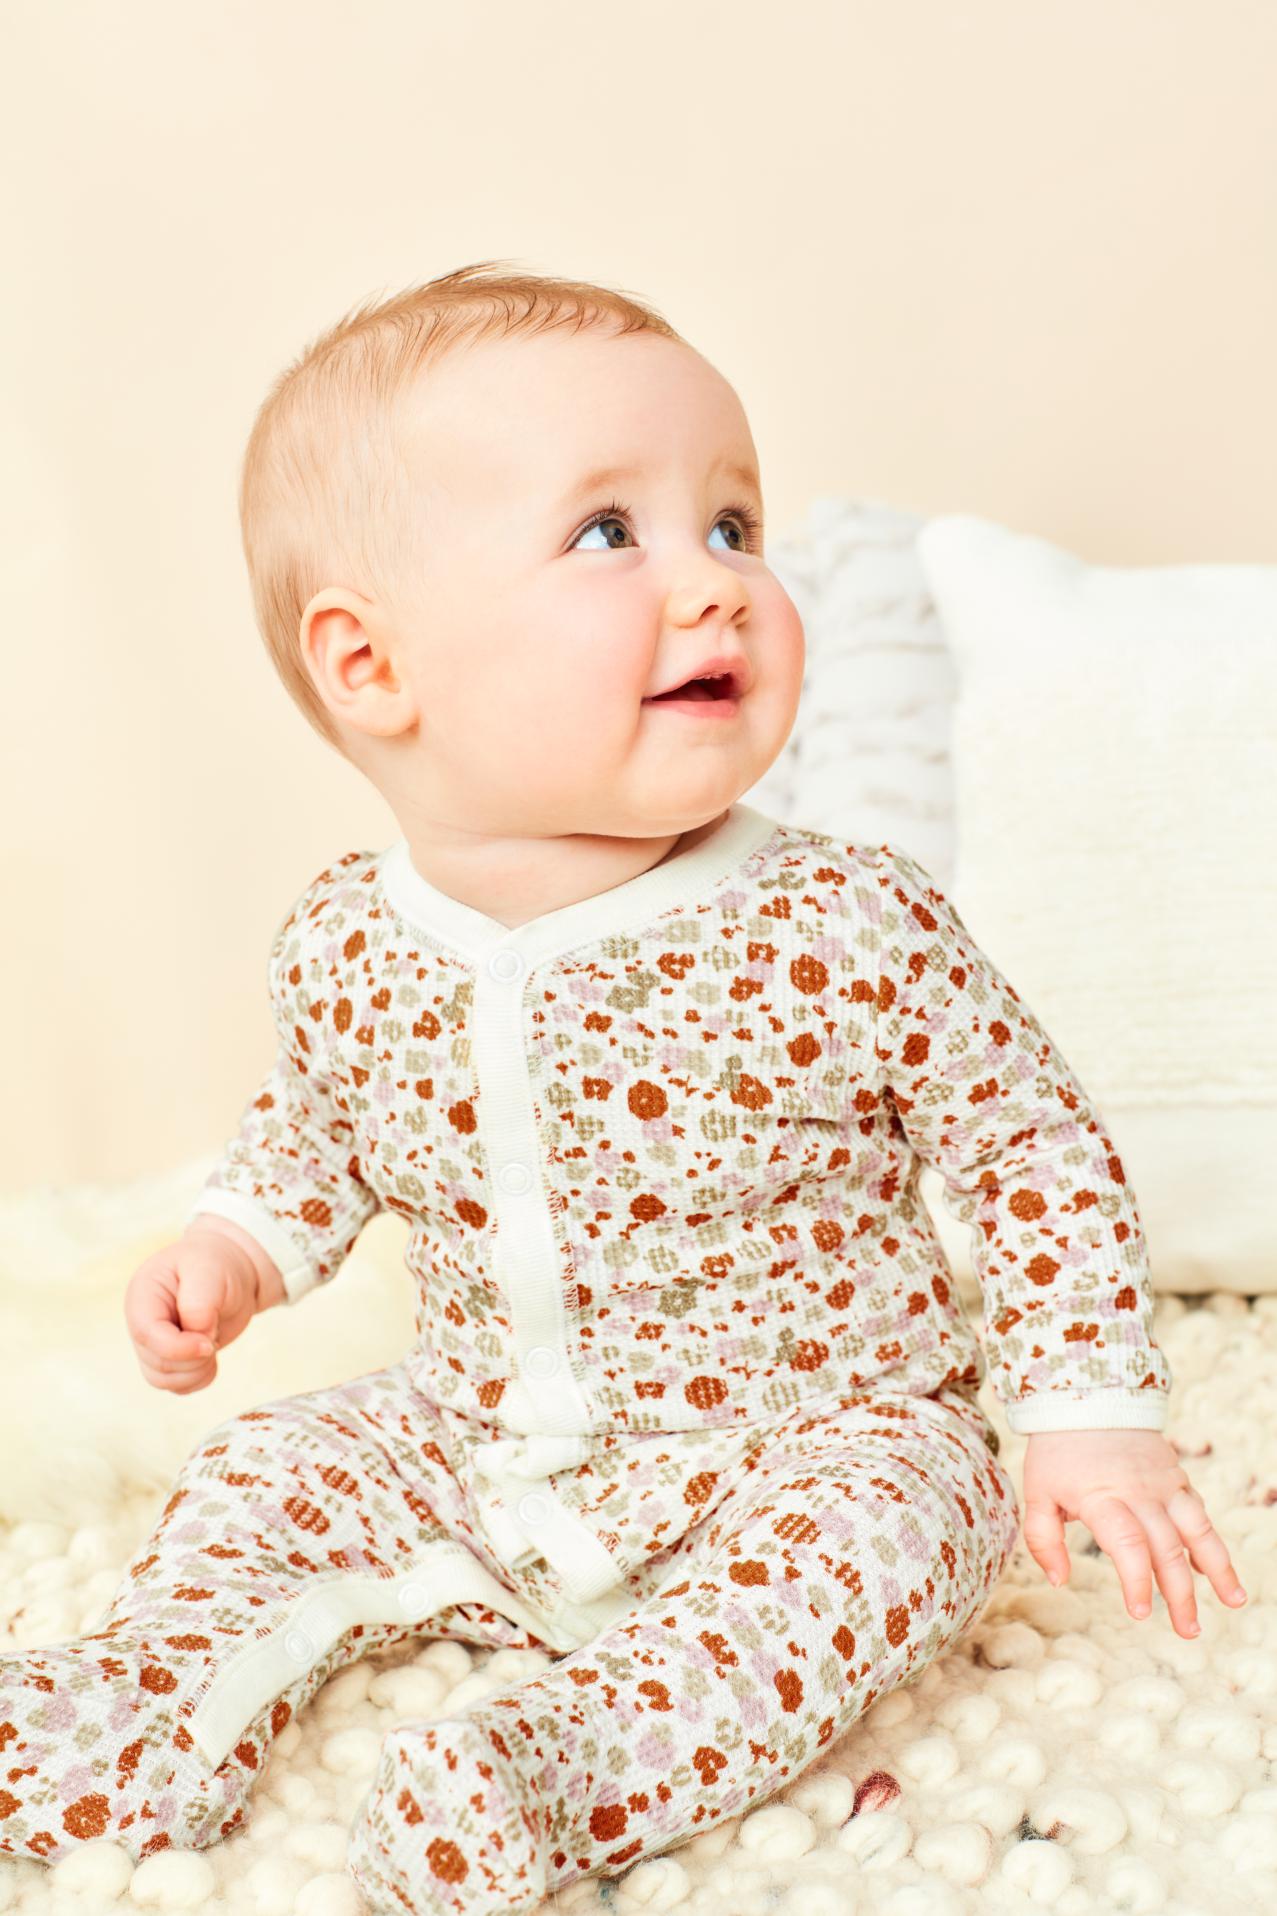 Carter's Baby Floral Snap-Up Thermal Sleep & Play